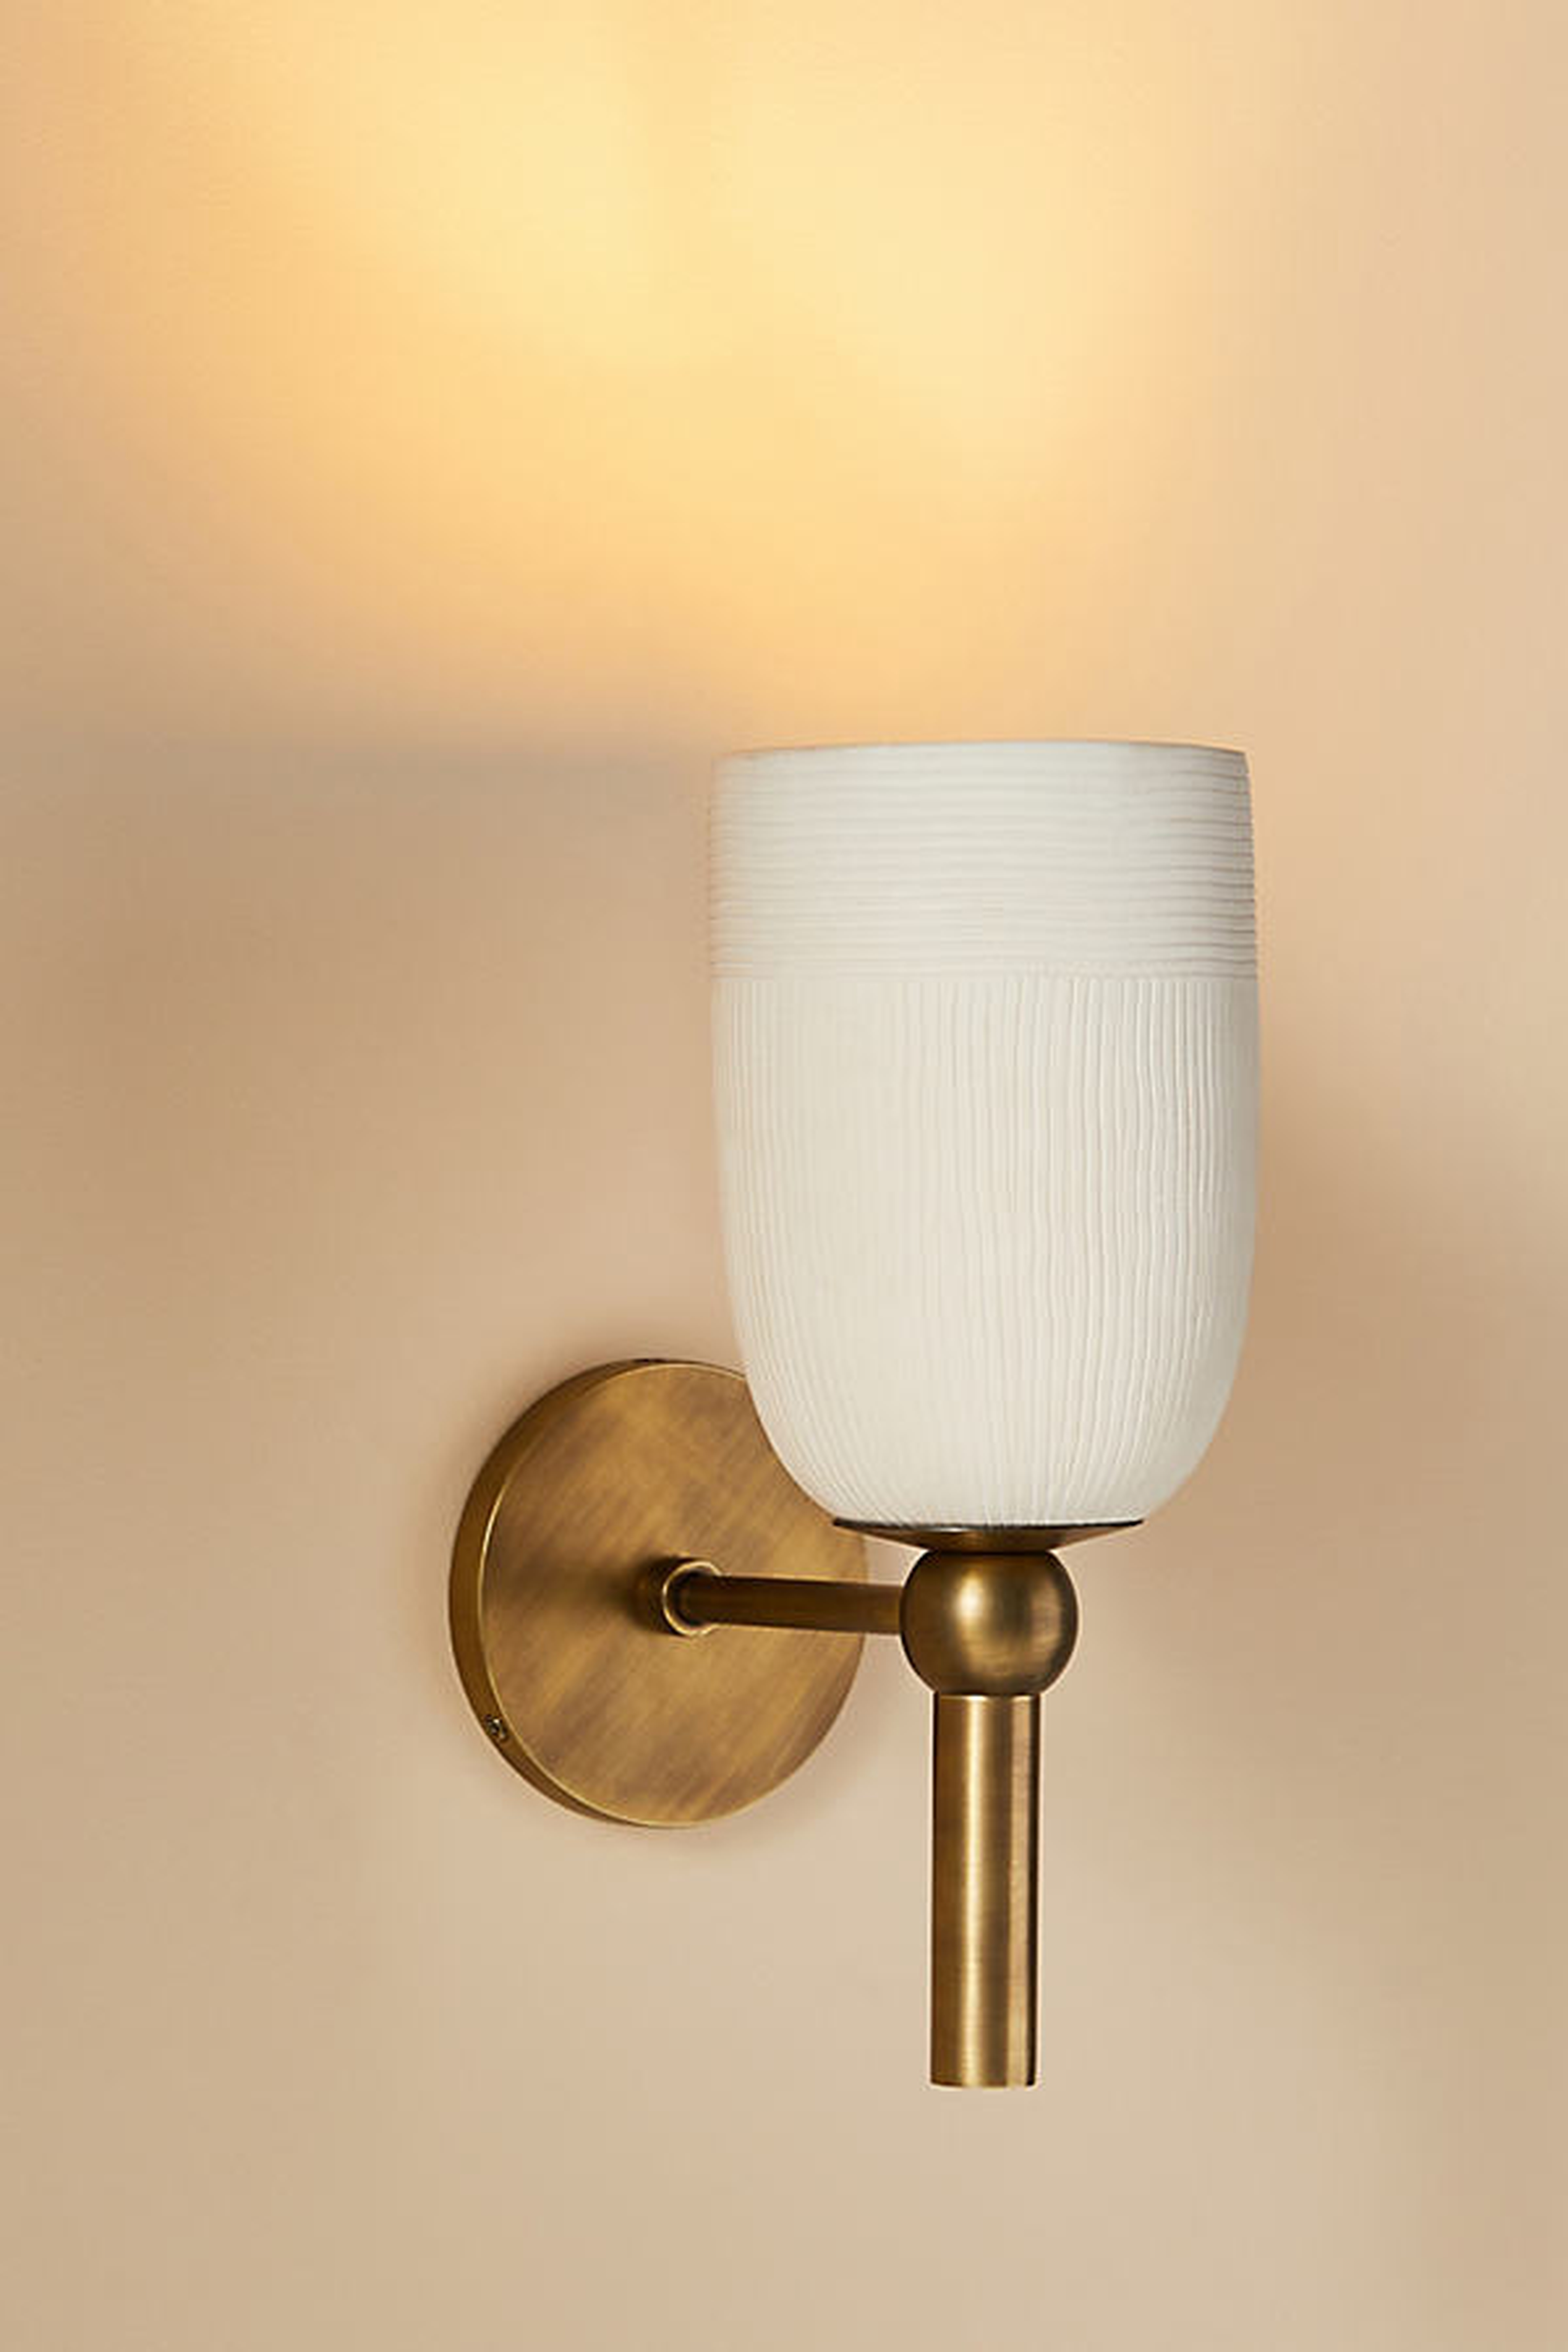 Blake Ceramic Sconce By Anthropologie in Pink - Anthropologie